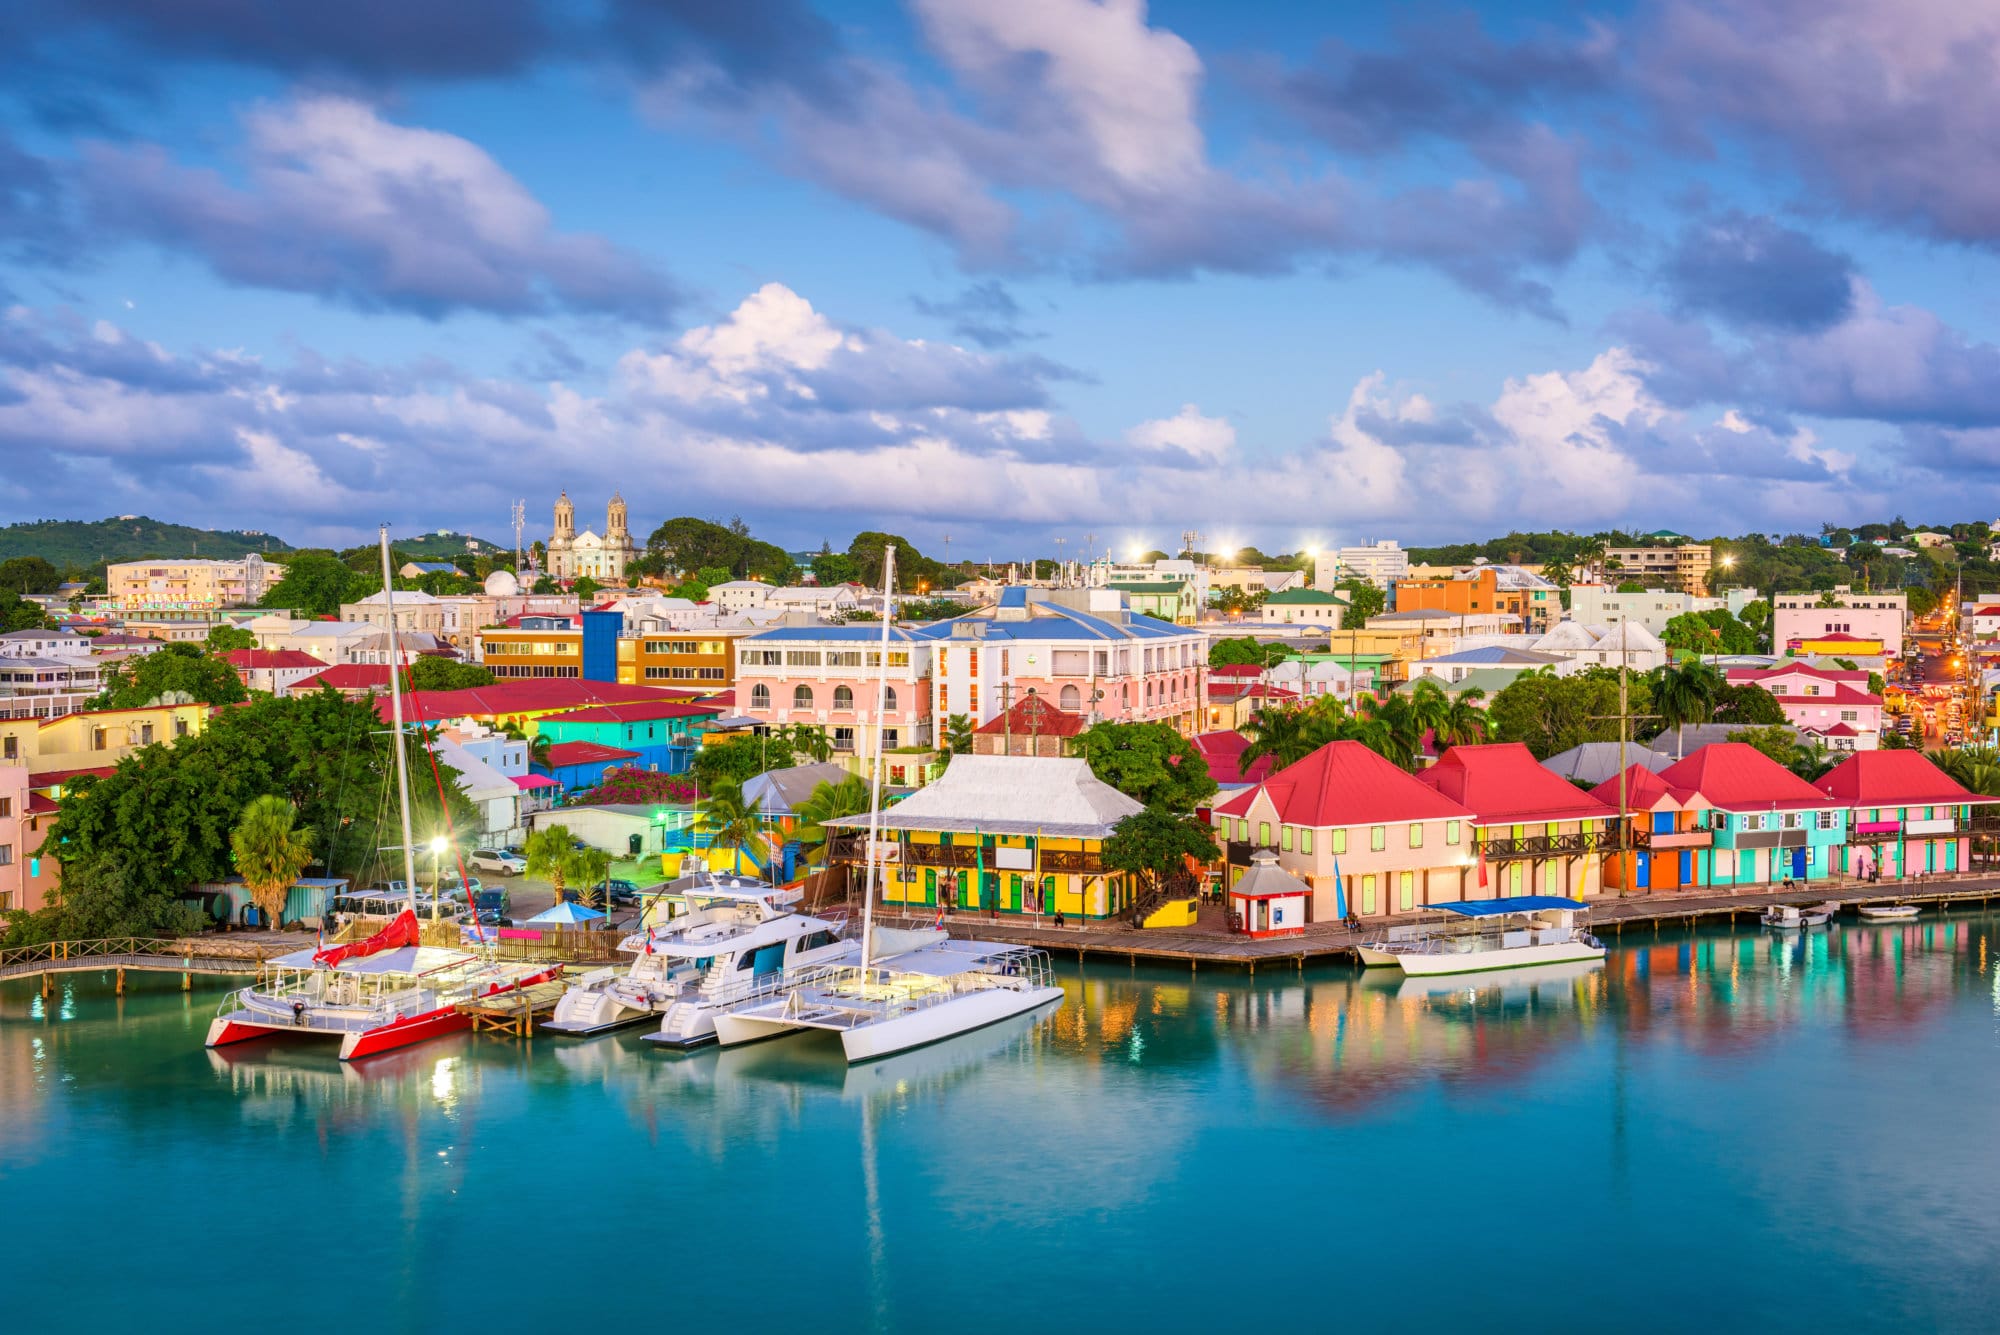 St. John's, Antigua and Barbuda town skyline on Redcliffe Quay at dusk.